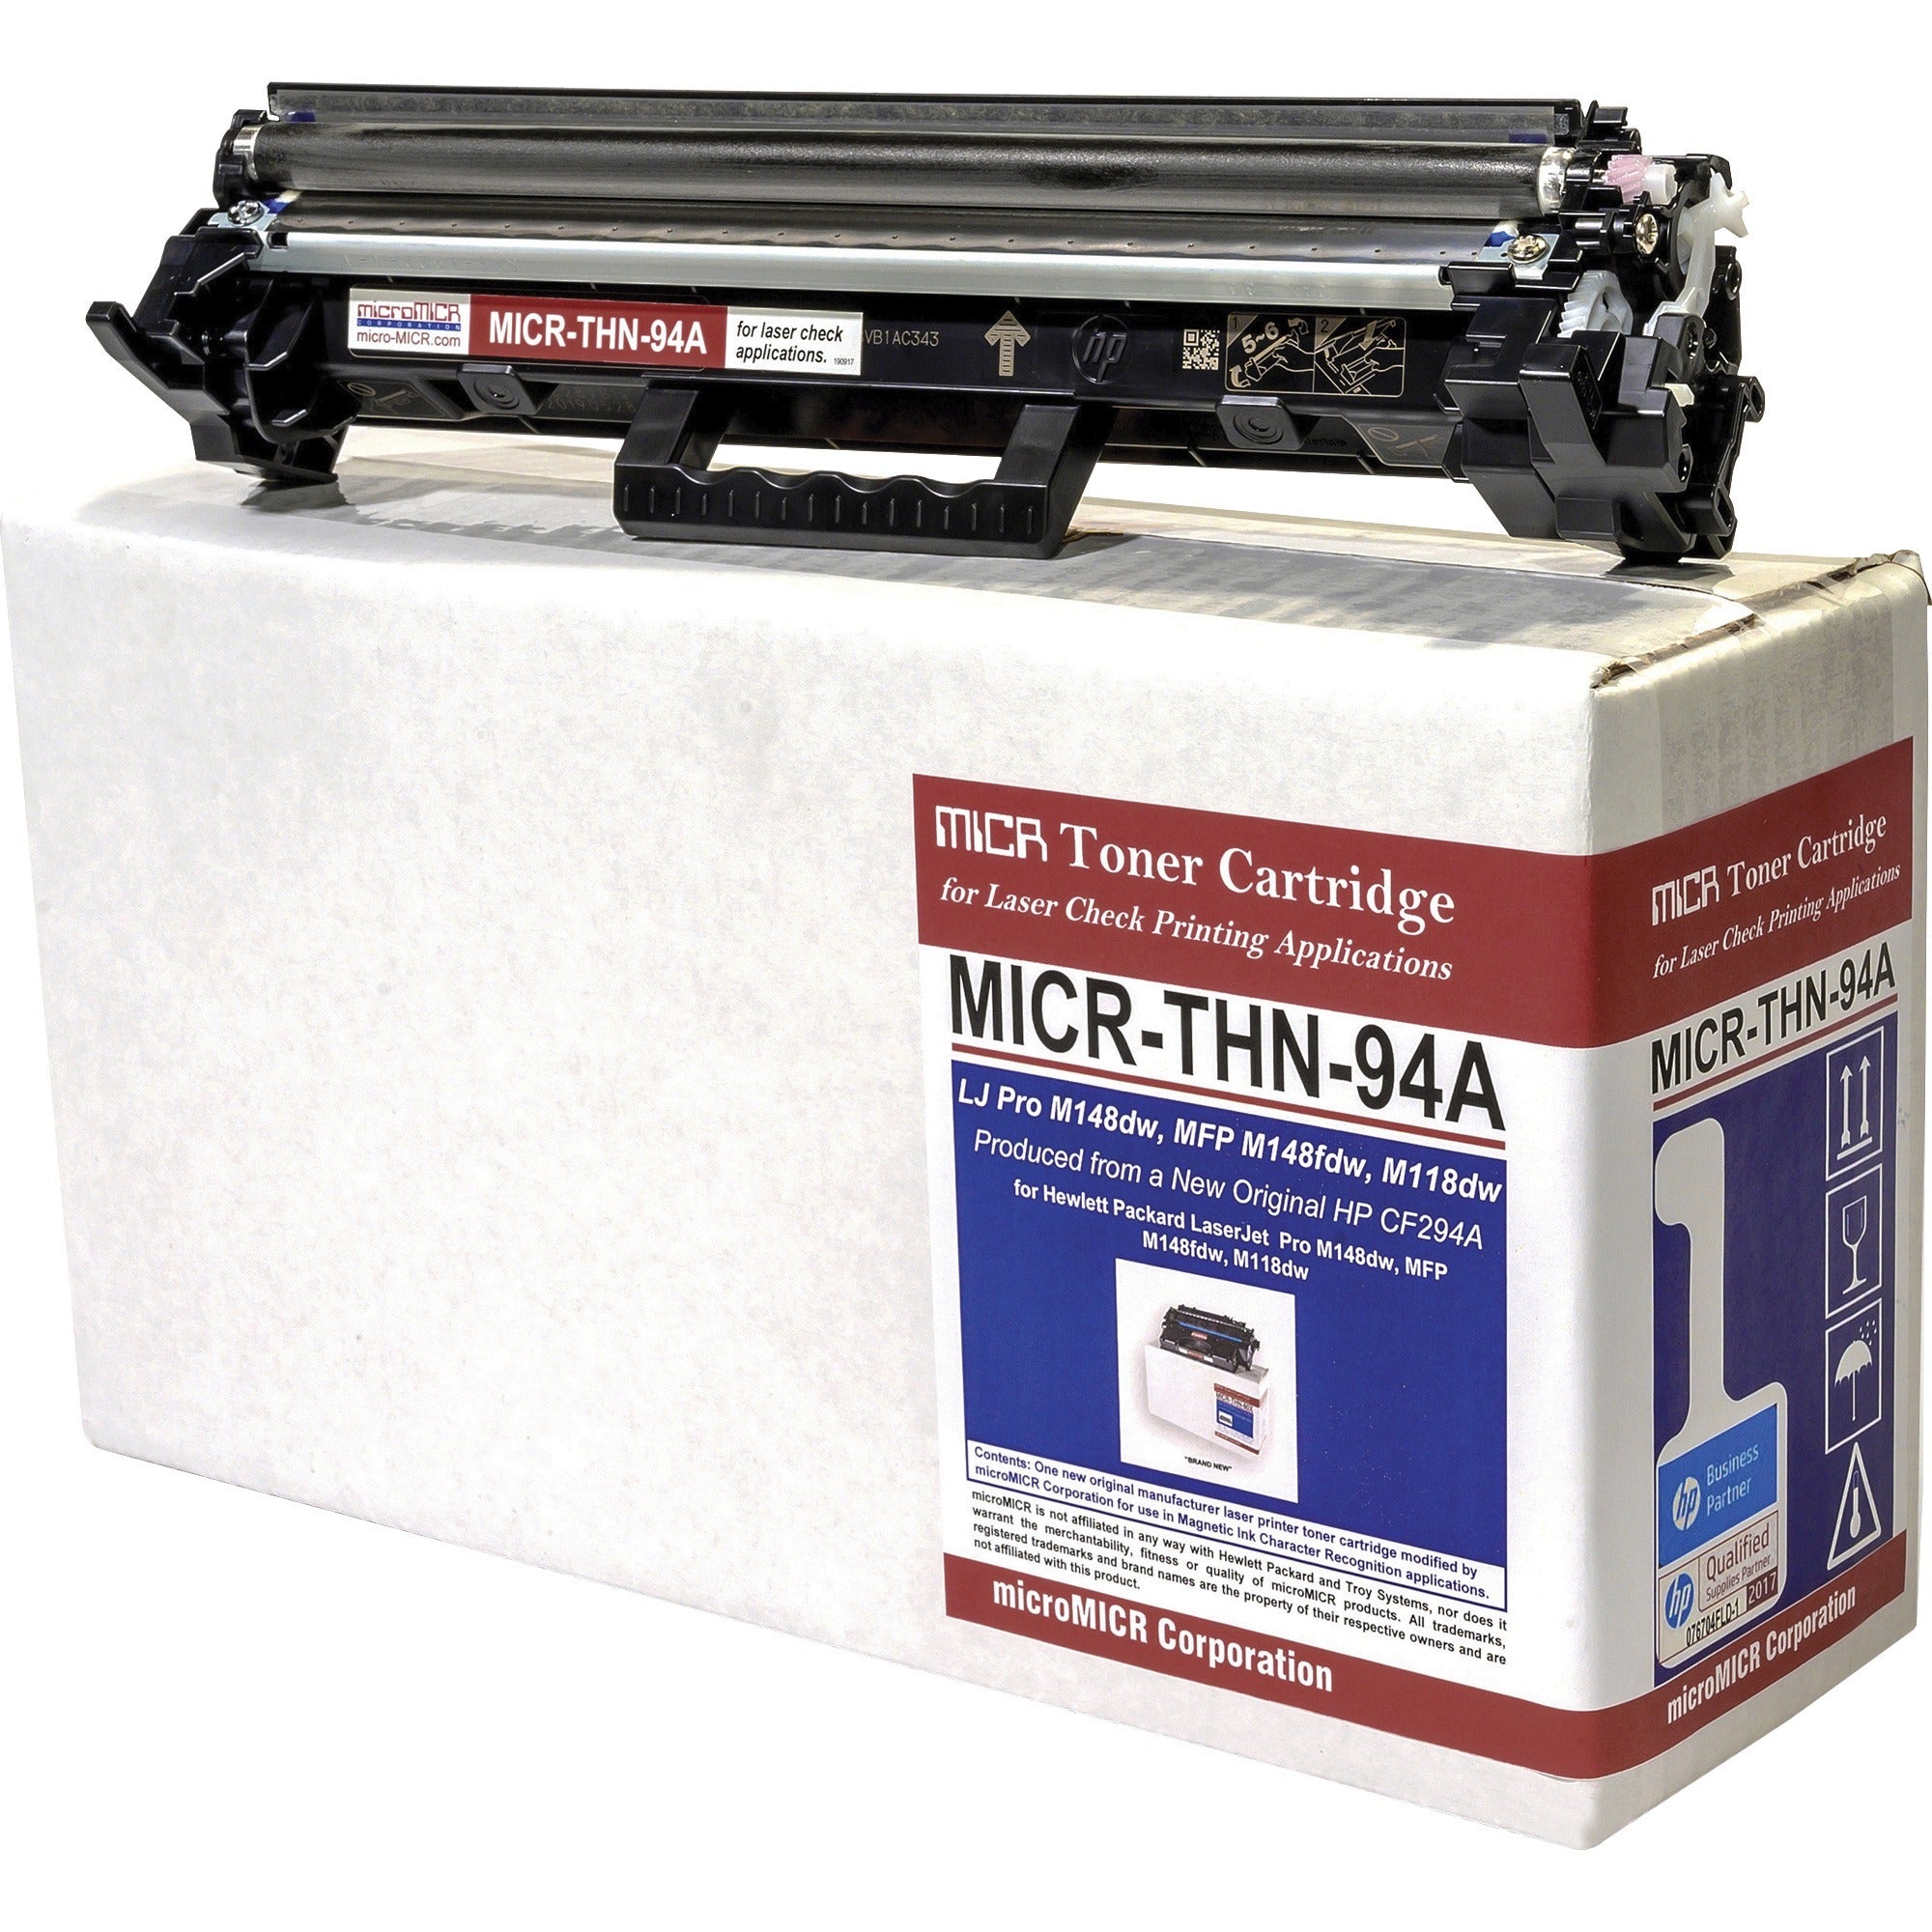 micromicr-remanufactured-micr-laser-toner-cartridge-alternative-for-hp-cf294a-black-1-each-1200-pages_mcmmicrthn94a - 1